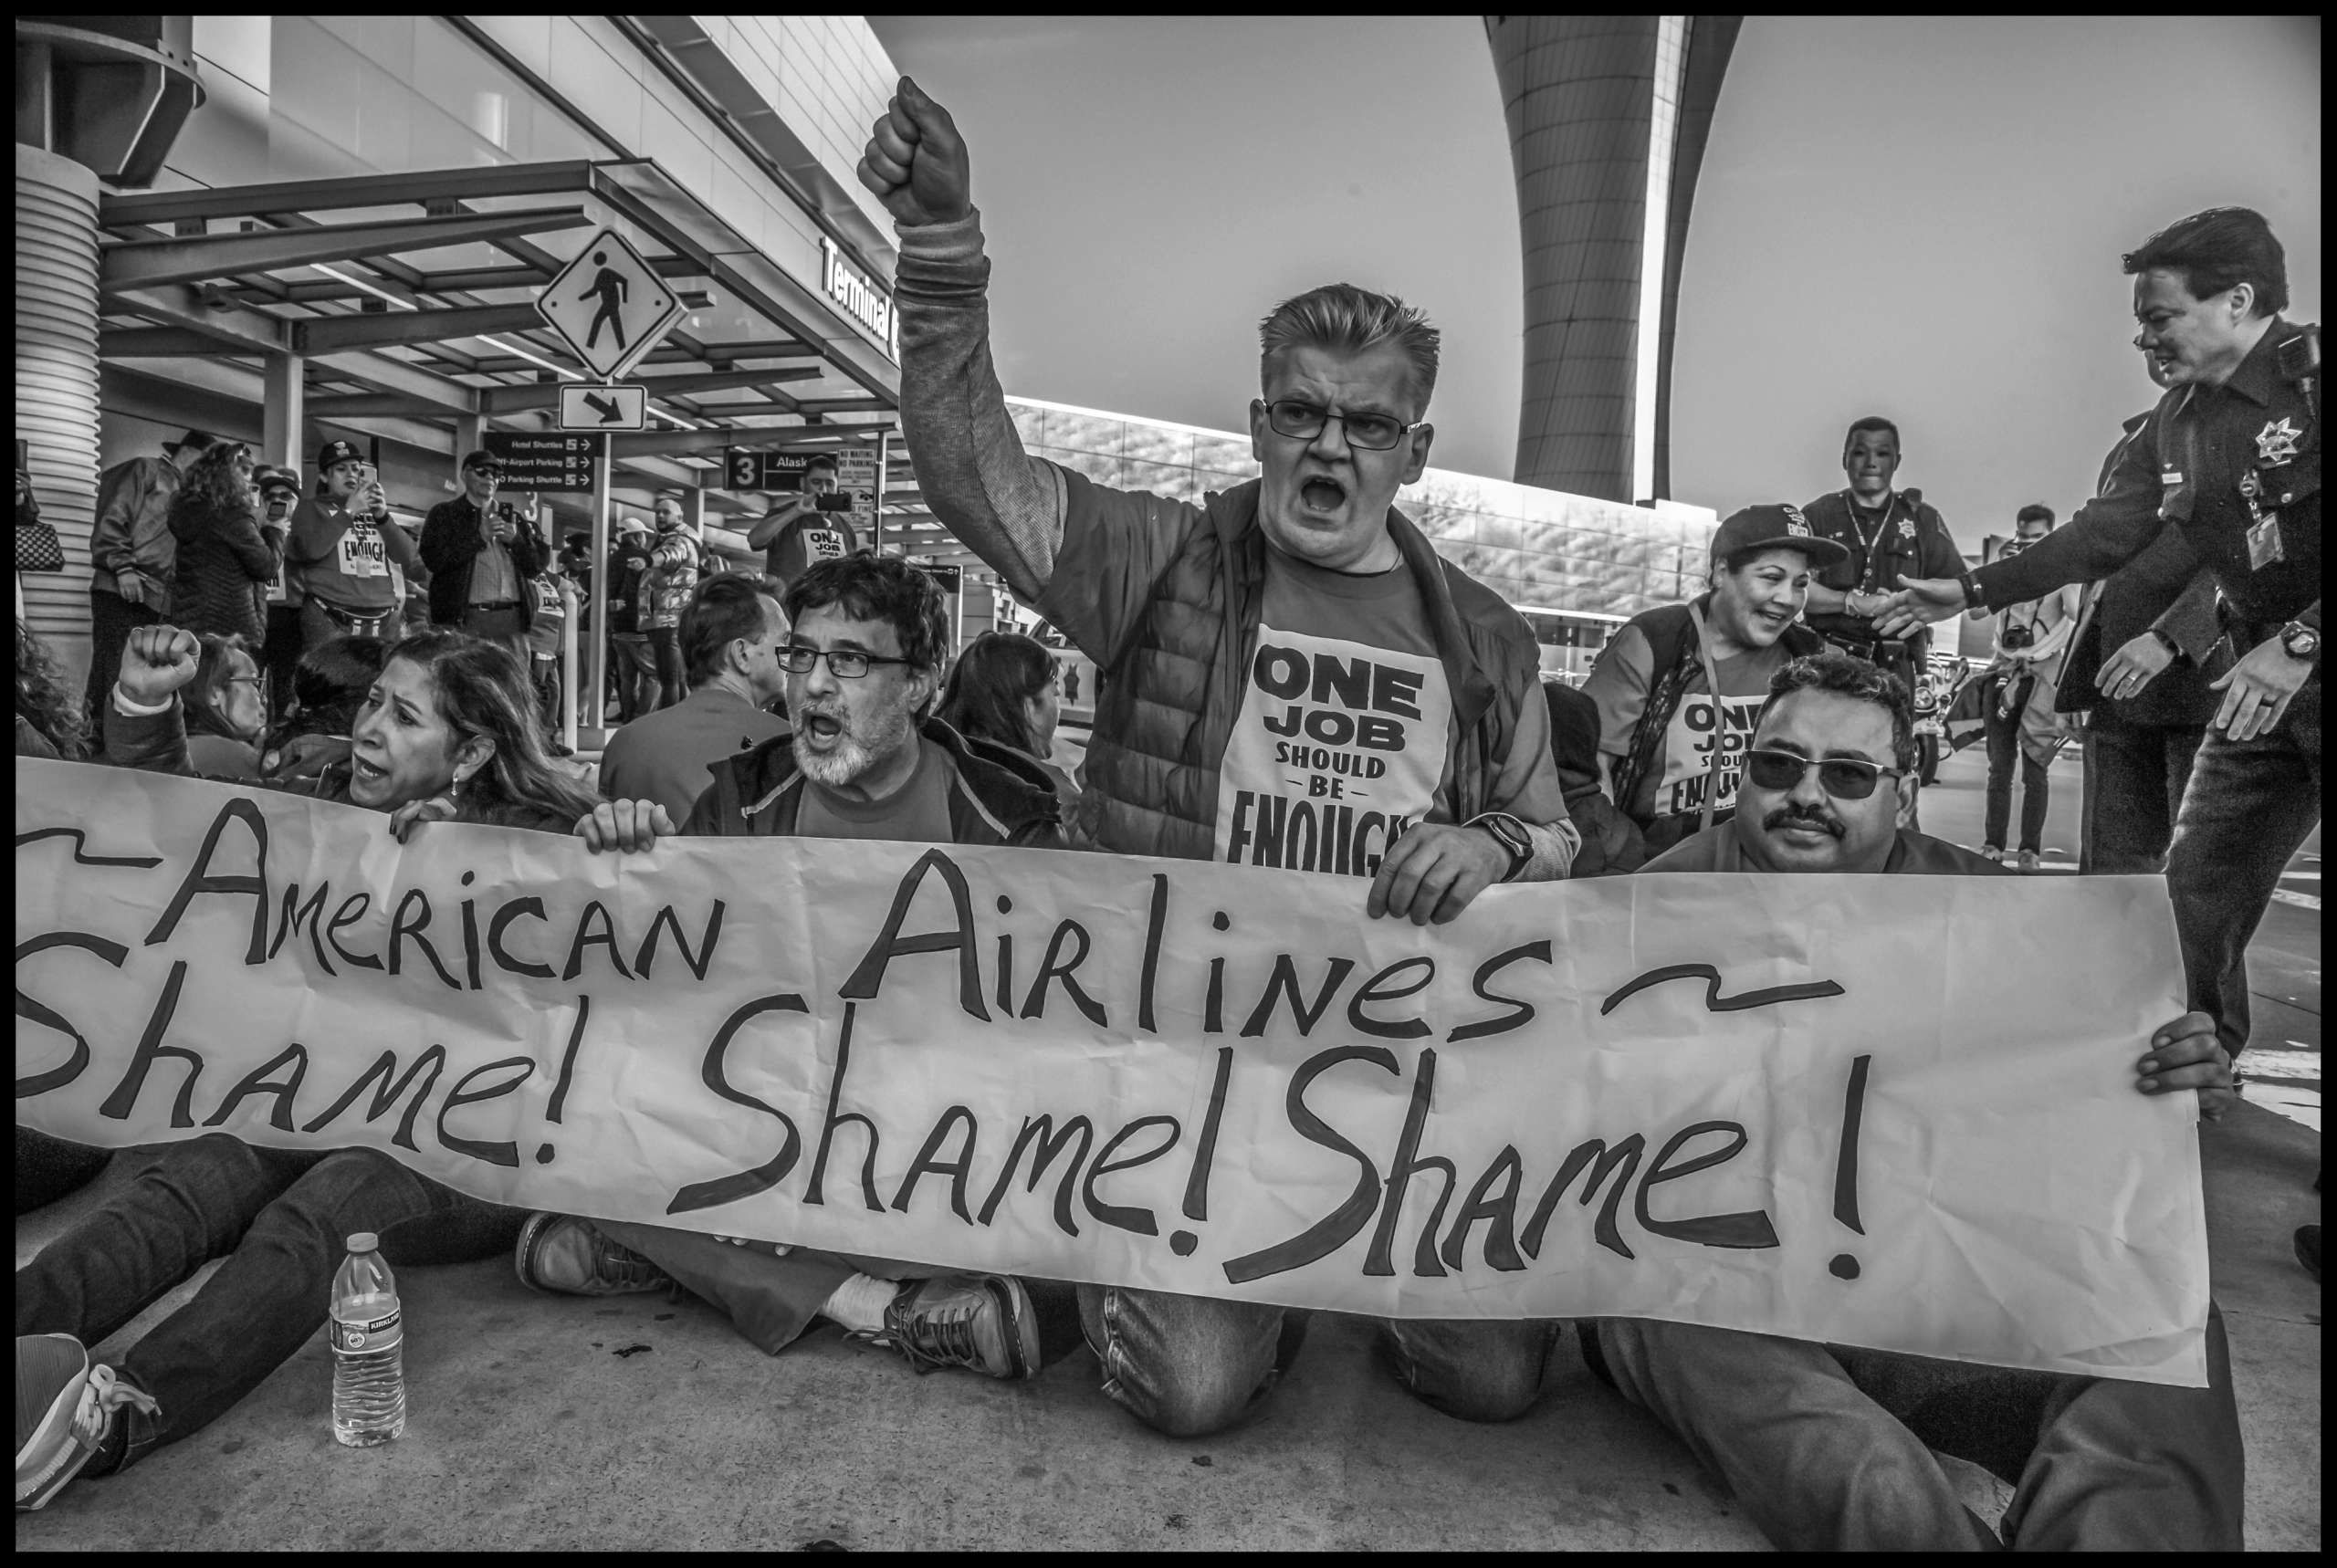 As they prepare to be arrested, workers hold a banner shaming American Airlines.